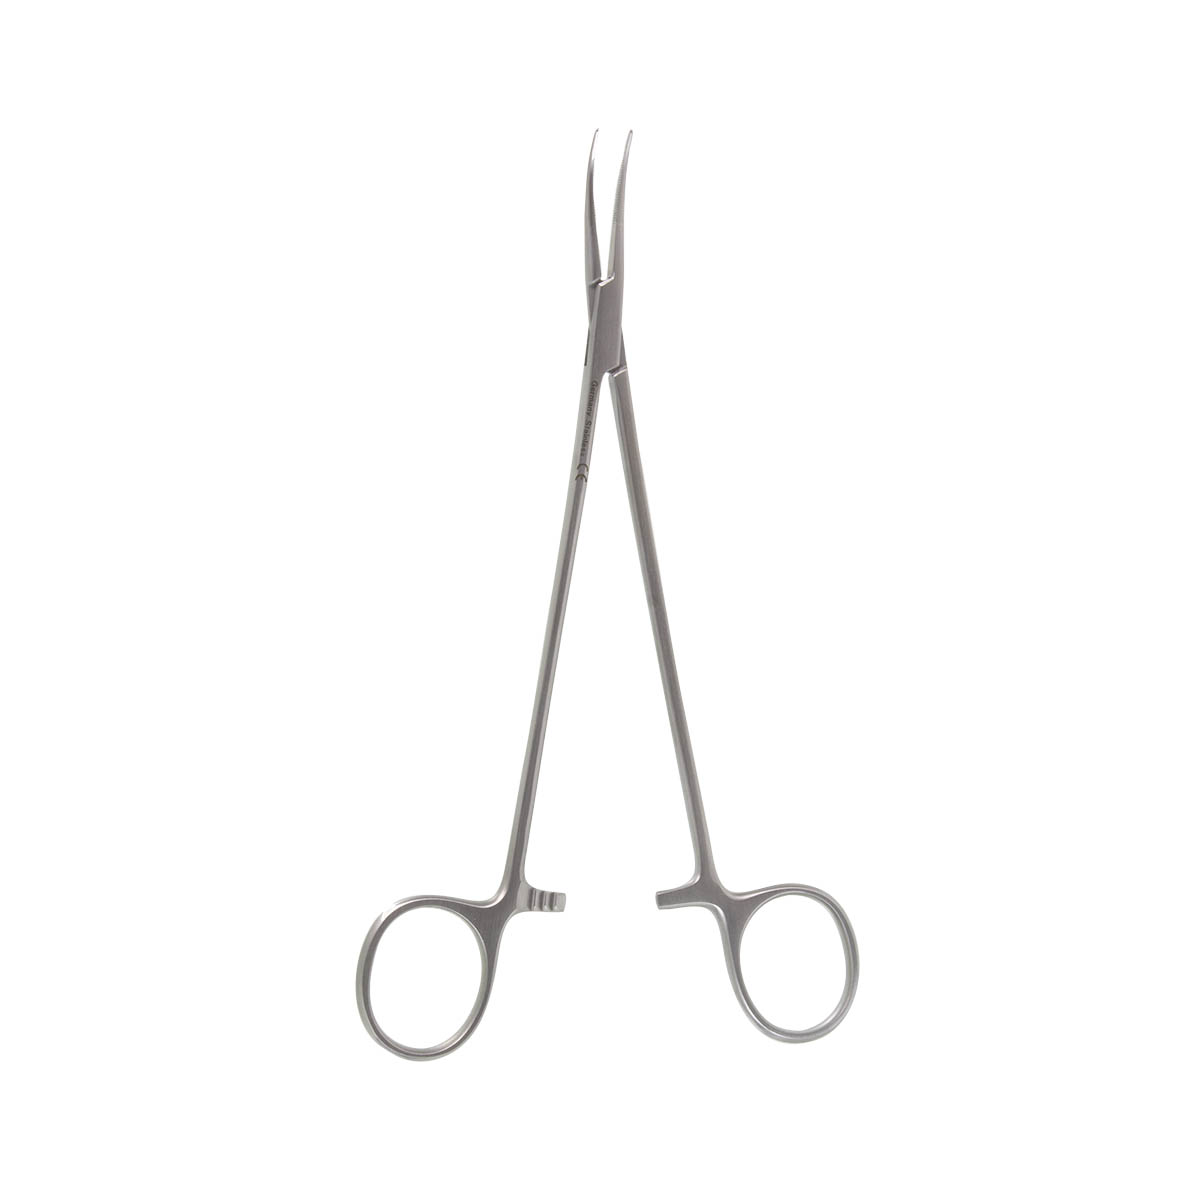 7 1/4 Jacobson Micro Scissors - micro blades straight - BOSS Surgical  Instruments